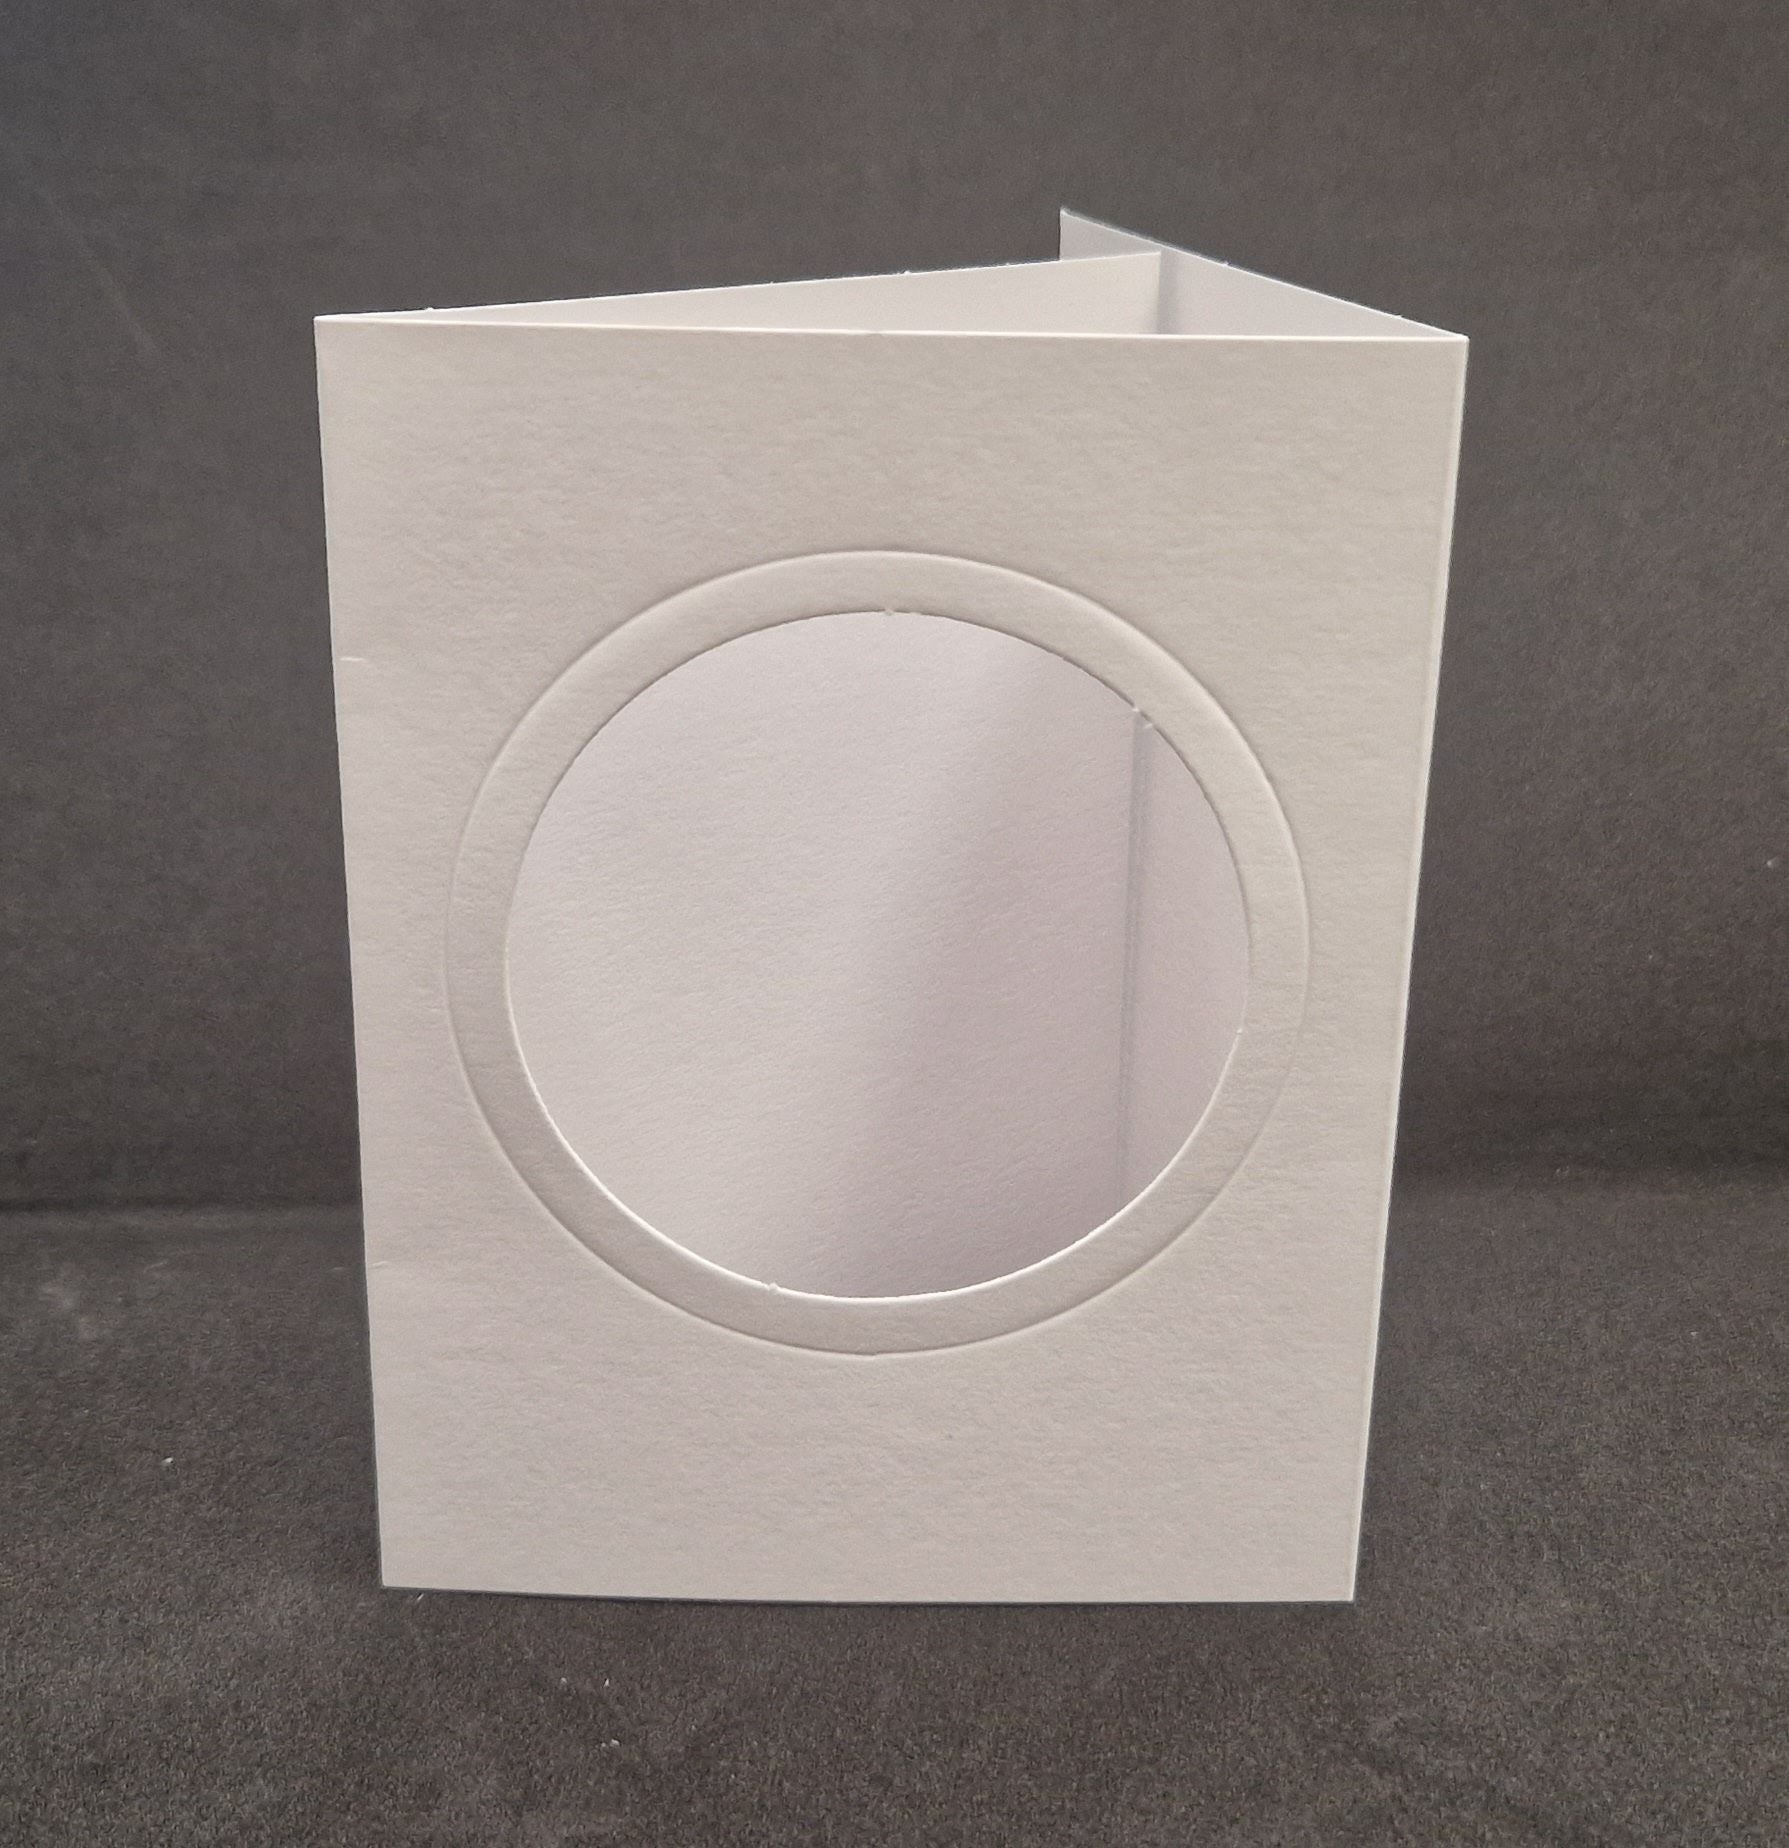 A6 Square Aperture Tri-fold White Cards & C6 Envelopes Smooth, Linen,  Speckle Embossed 5 Pack 10x15cm 6x4 Card Making Cross Stitch 